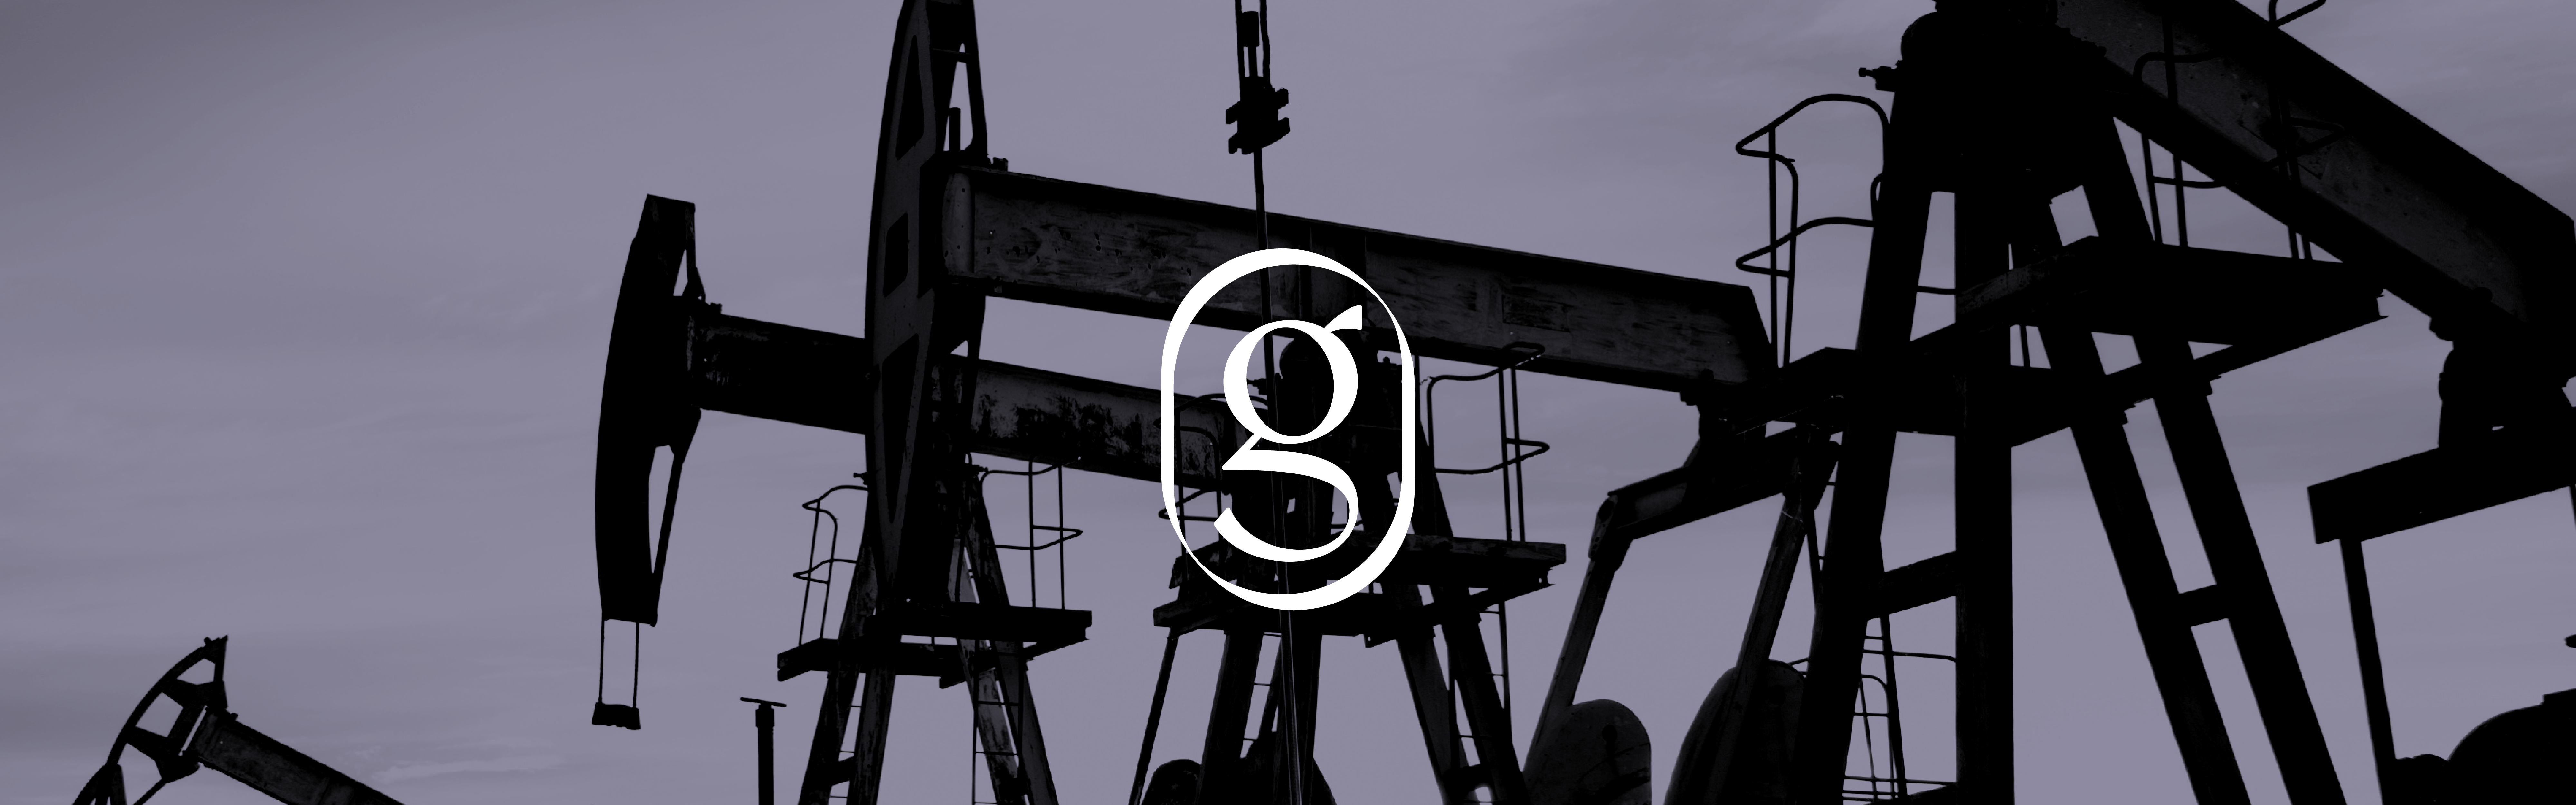 Silhouettes of oil pump jacks against a dusky sky, with a large number "3" superimposed on the central pump by Grace Mineral Management.